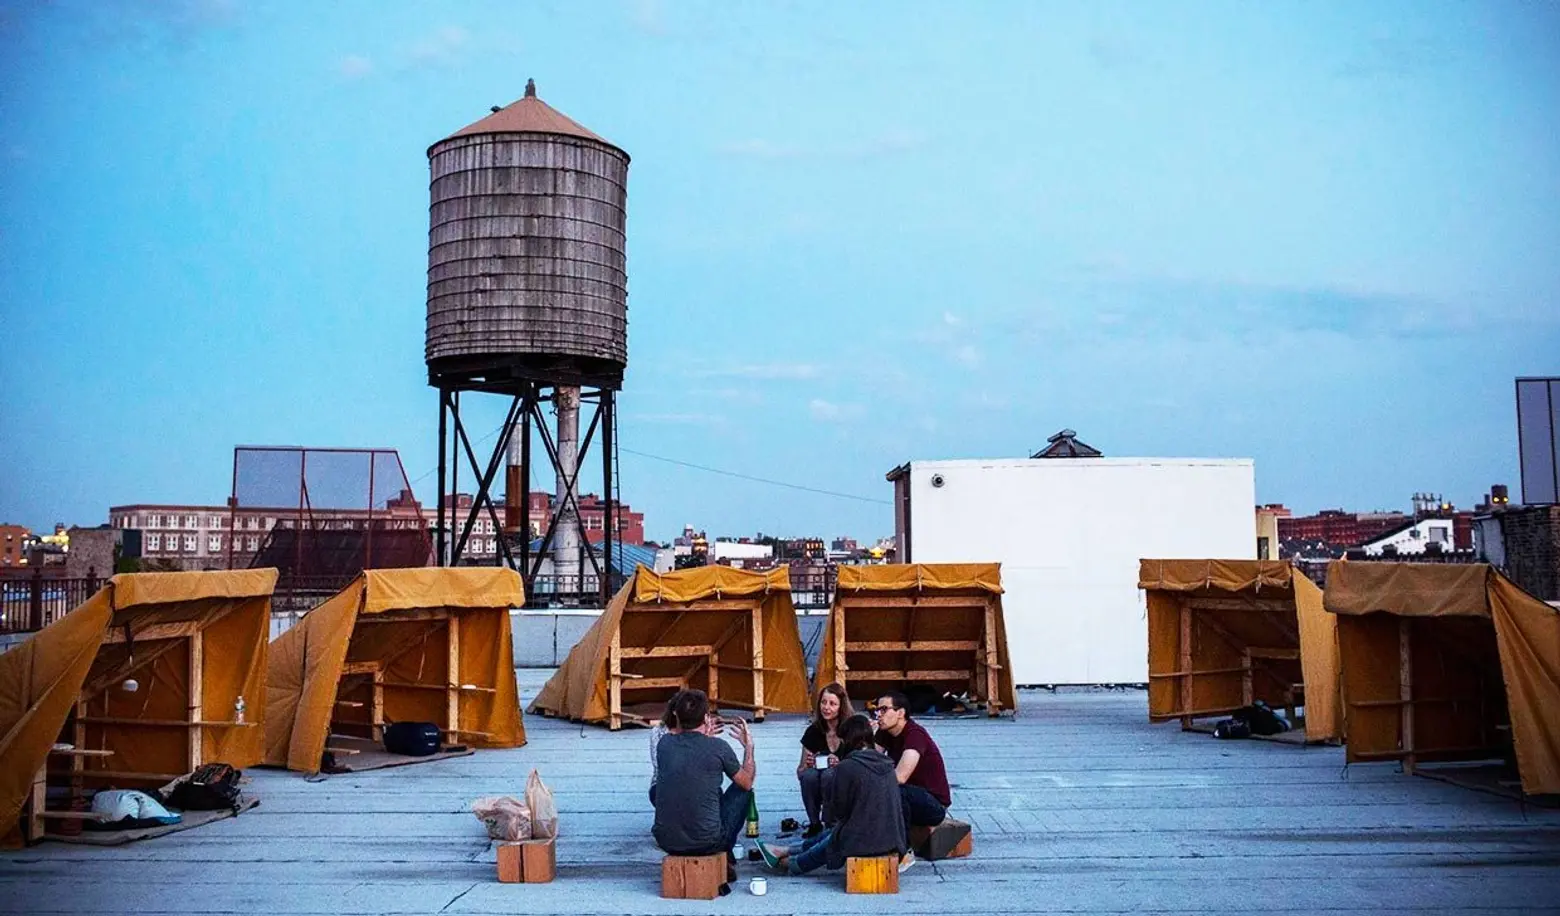 Bivouac offers free off-grid camping on a secret NYC rooftop